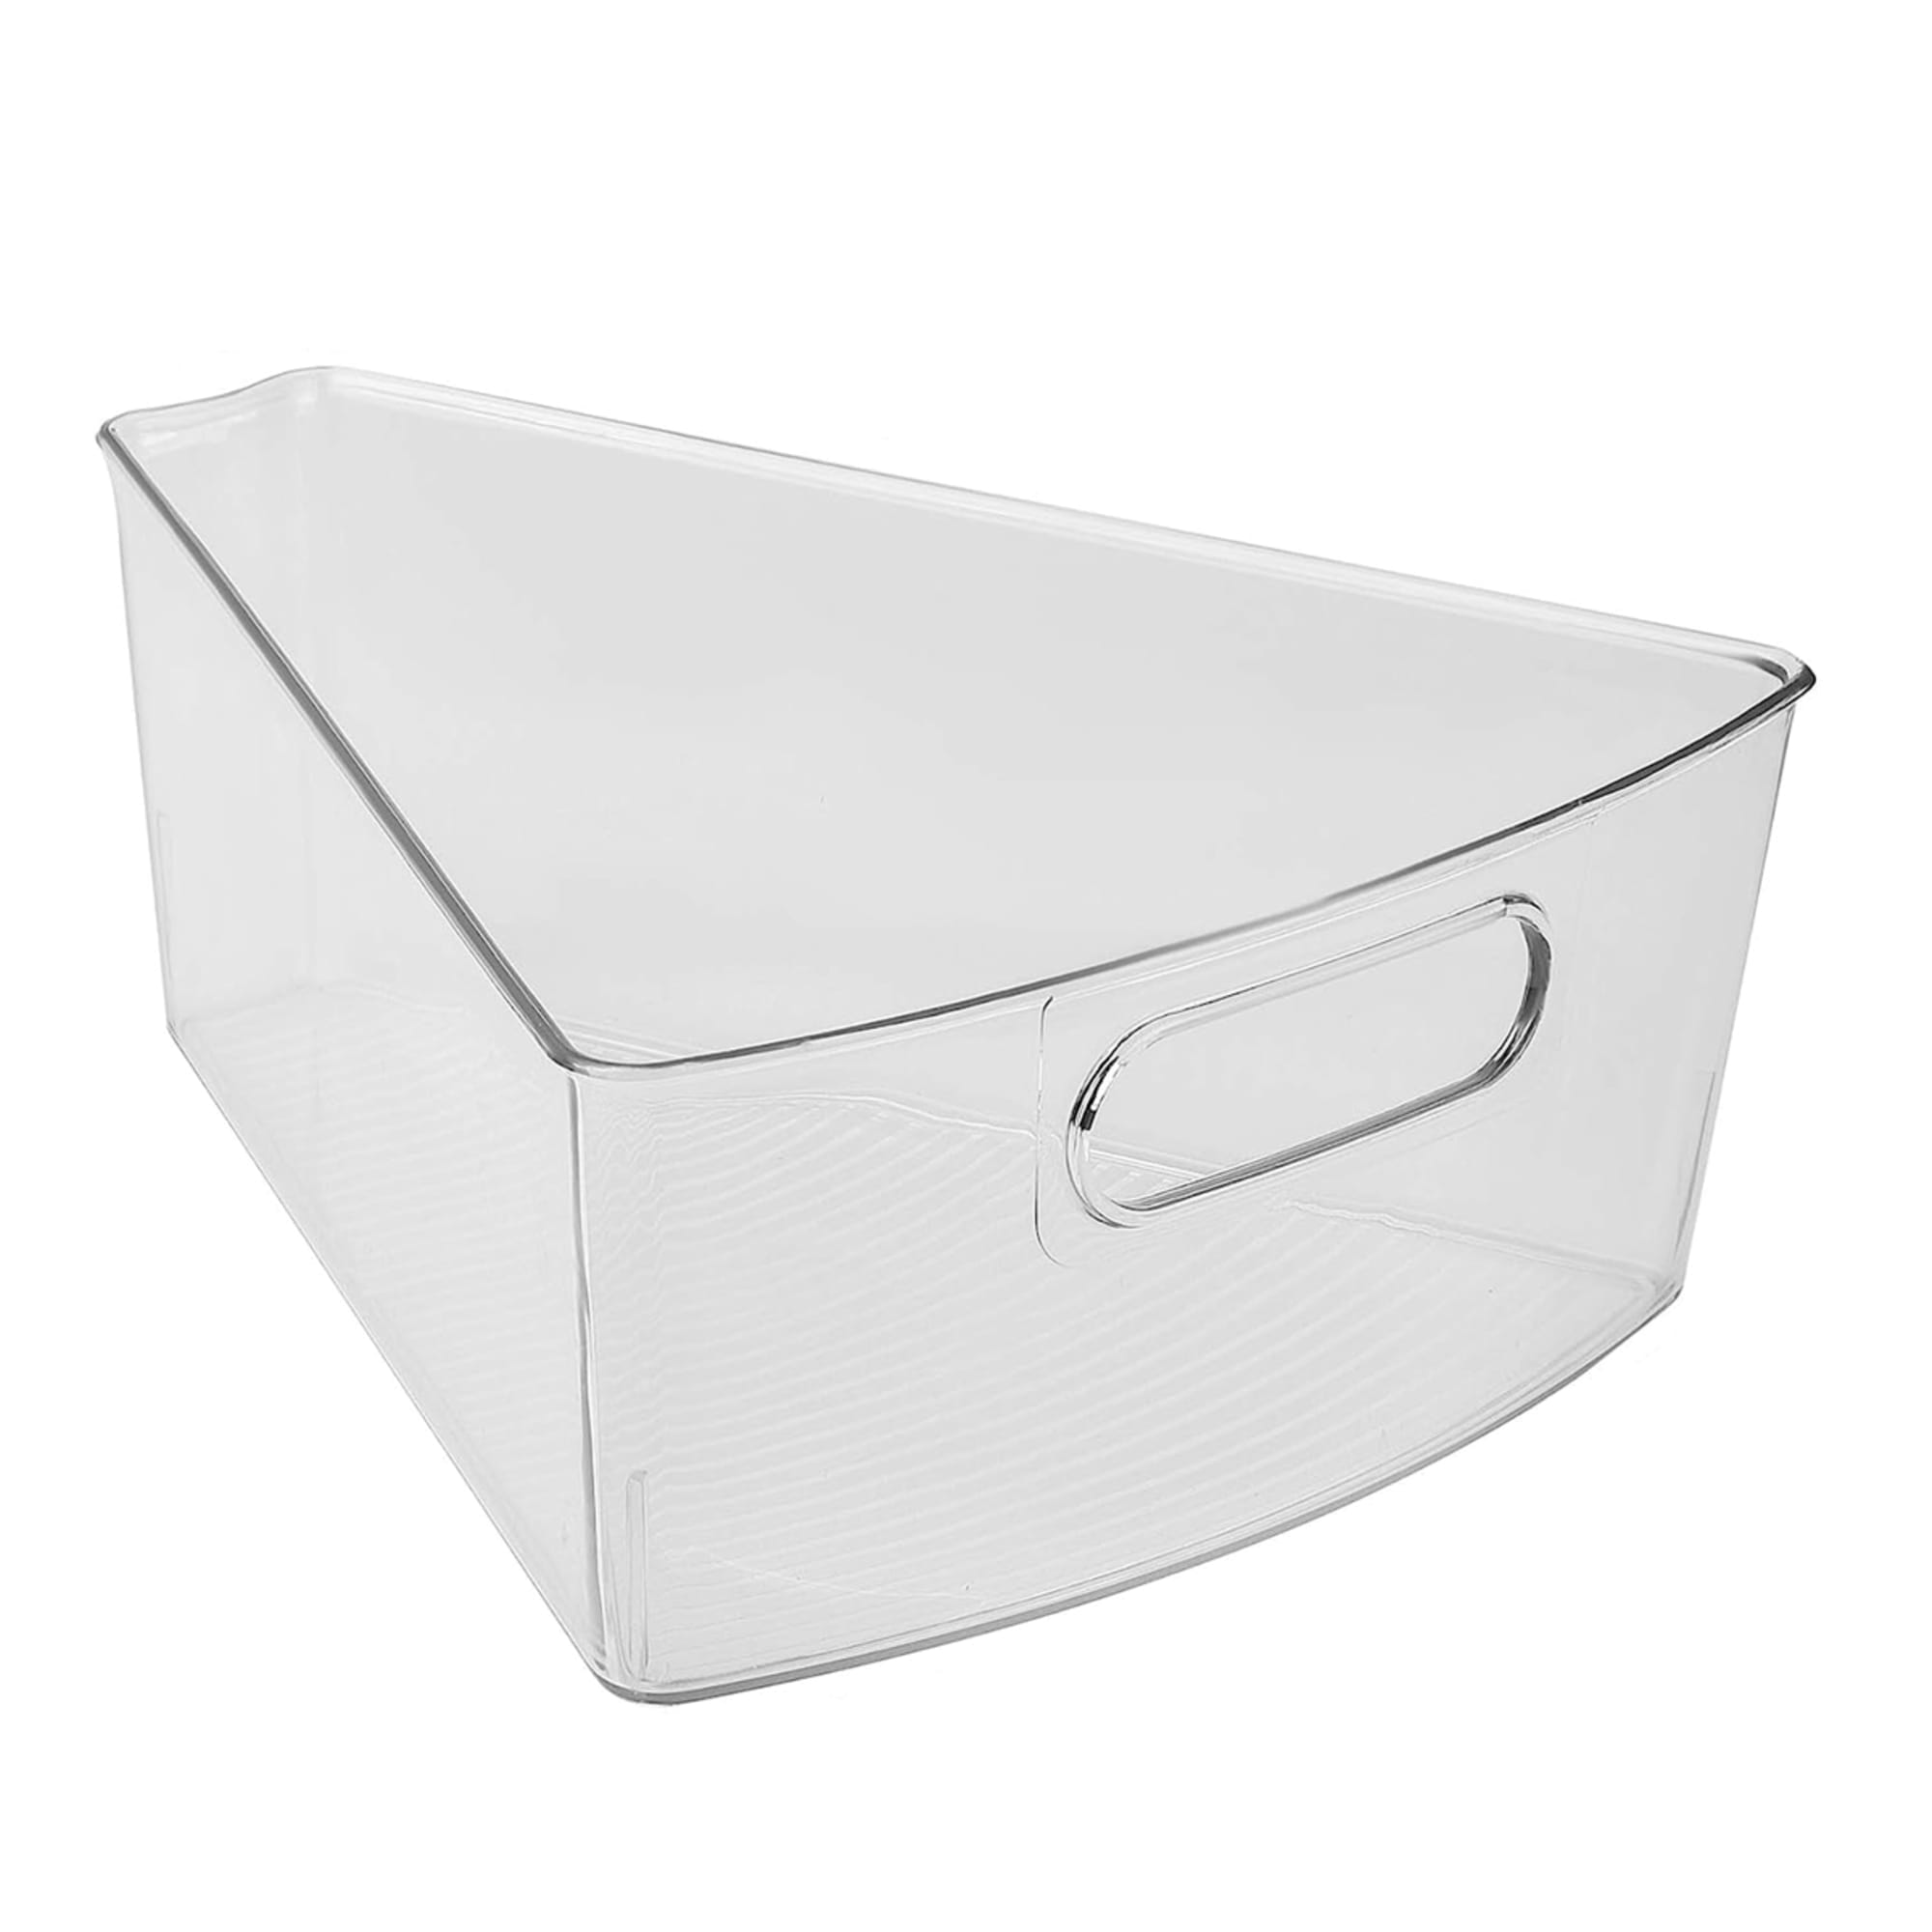 Home Basics Large Pull-Out Plastic Storage Bin with Soft Grip